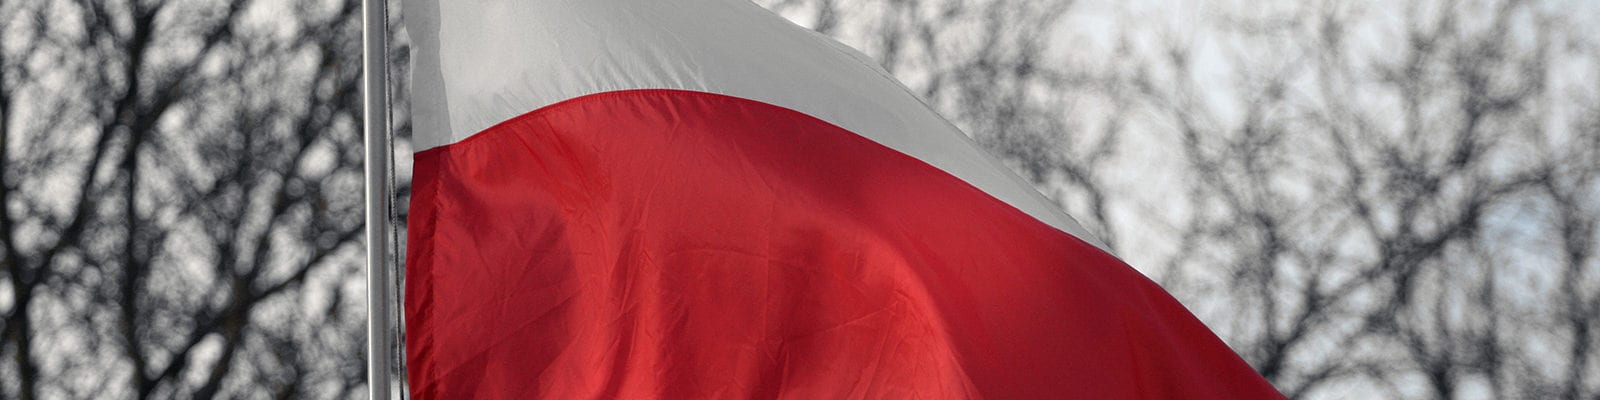 The flag of Poland flying on a windy, cloudy day.